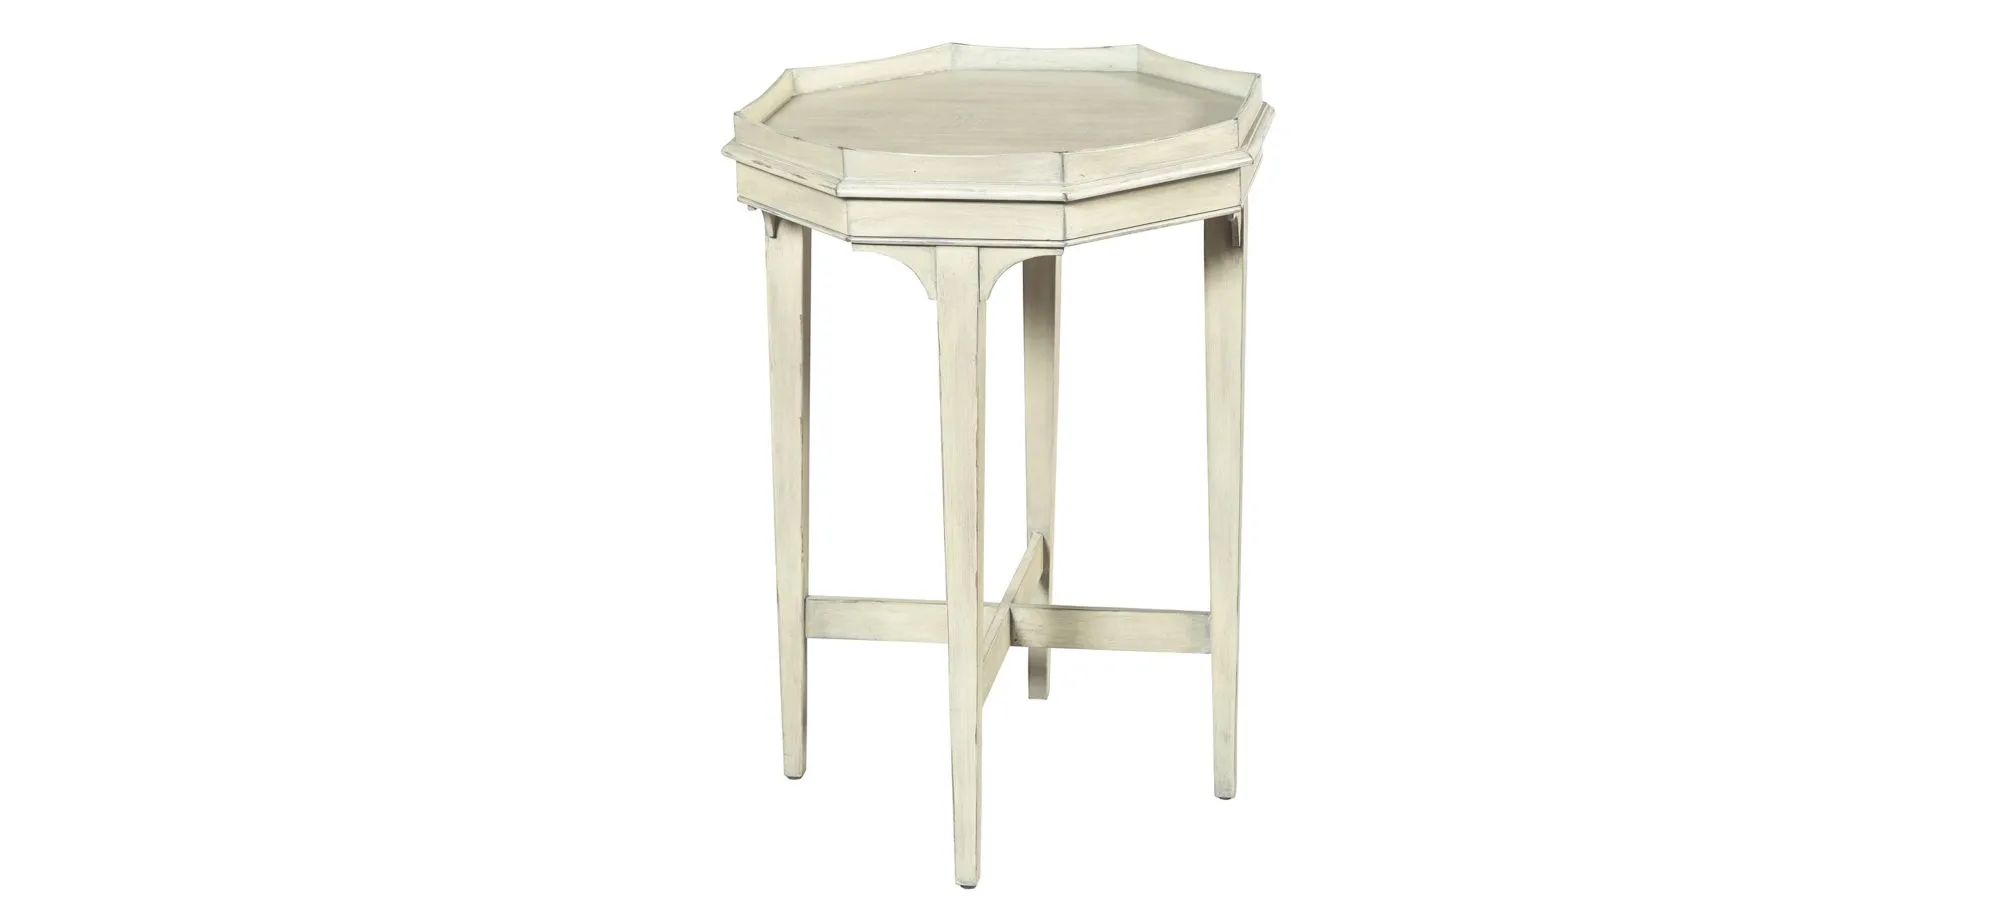 Special Reserve Light Accent Table in SPECIAL RESERVE by Hekman Furniture Company